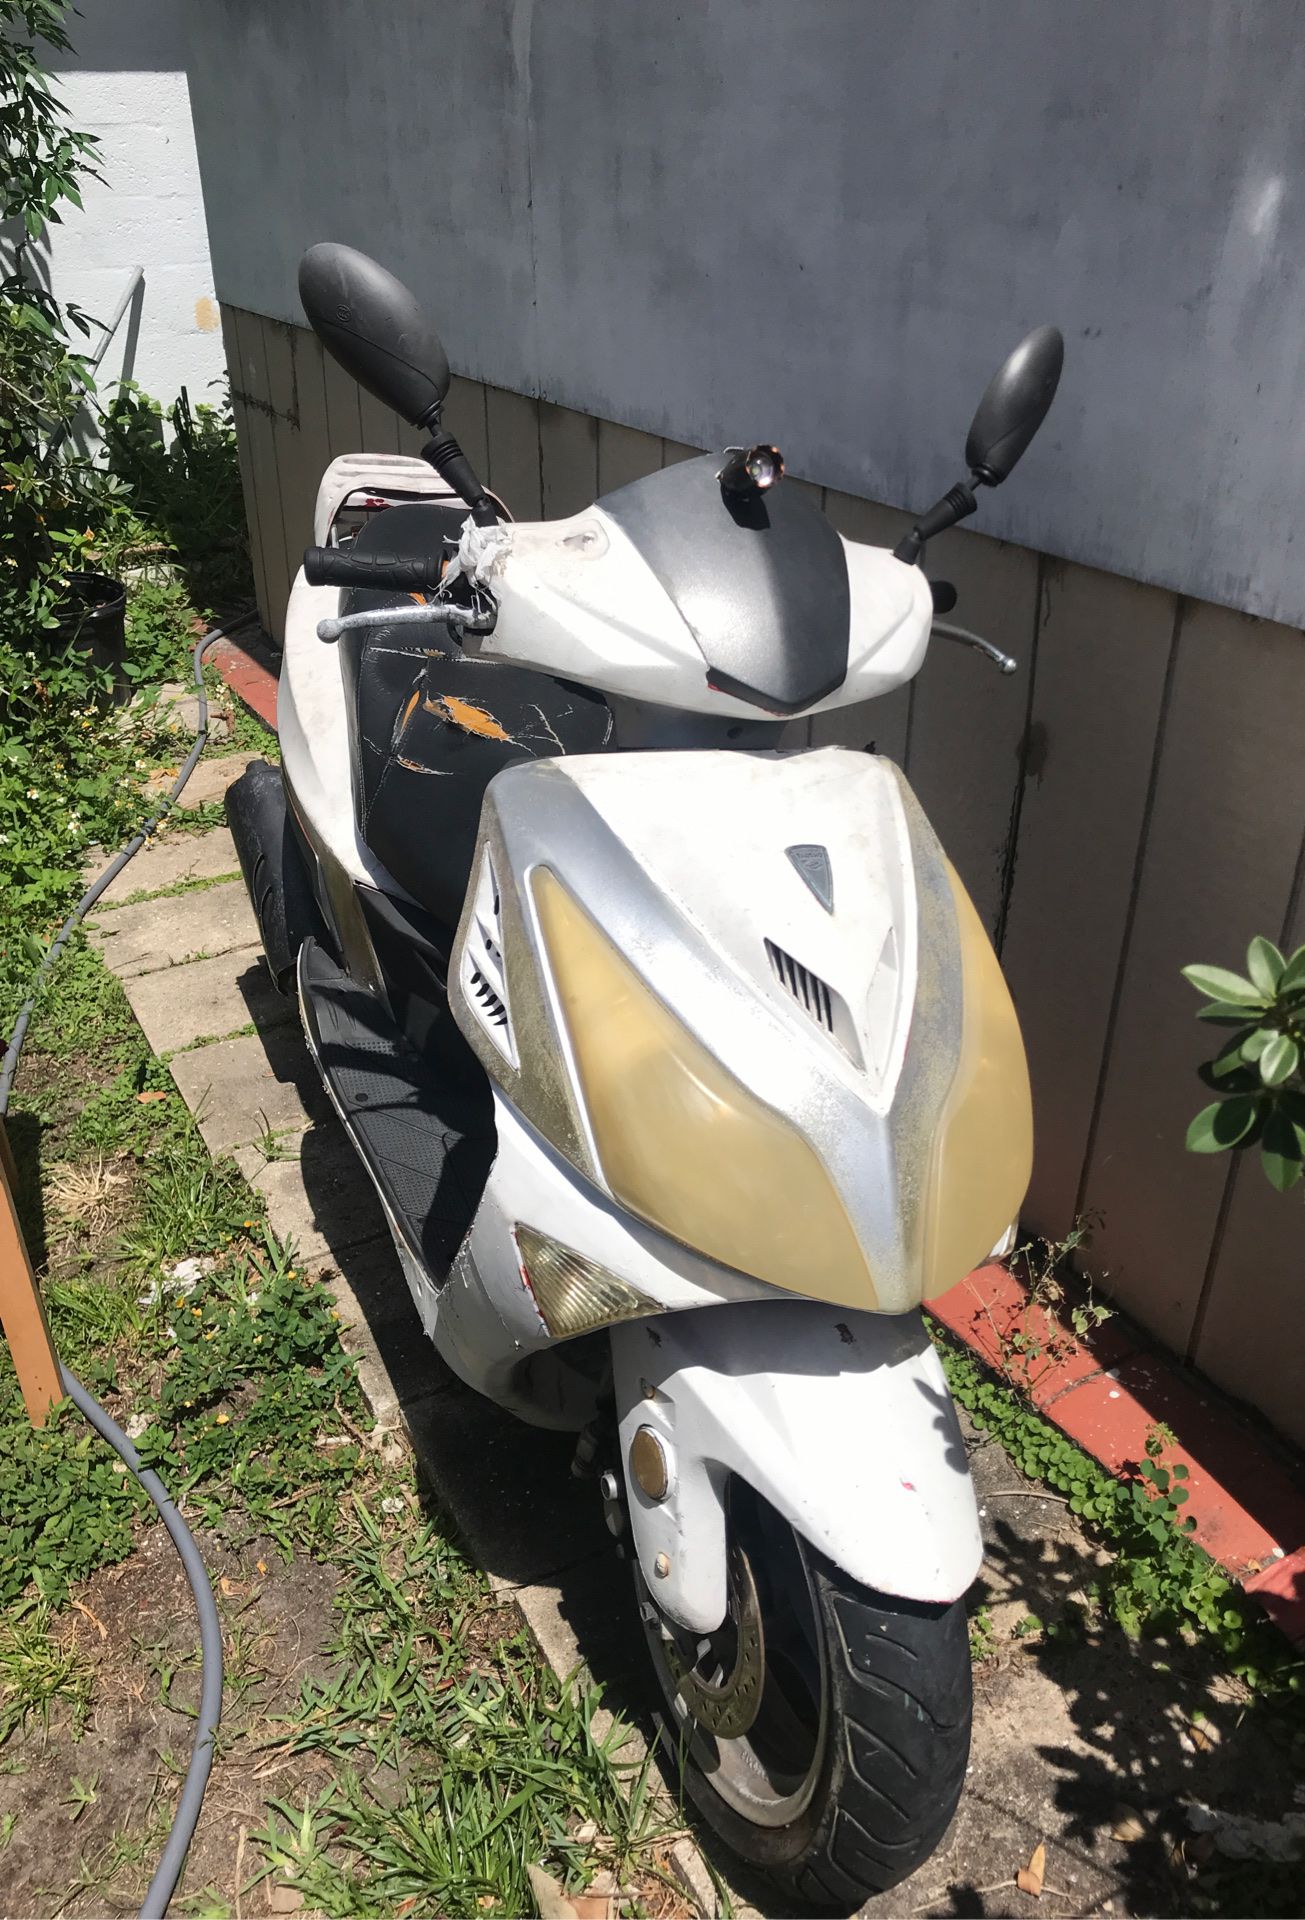 06/2012 150cc Scooter